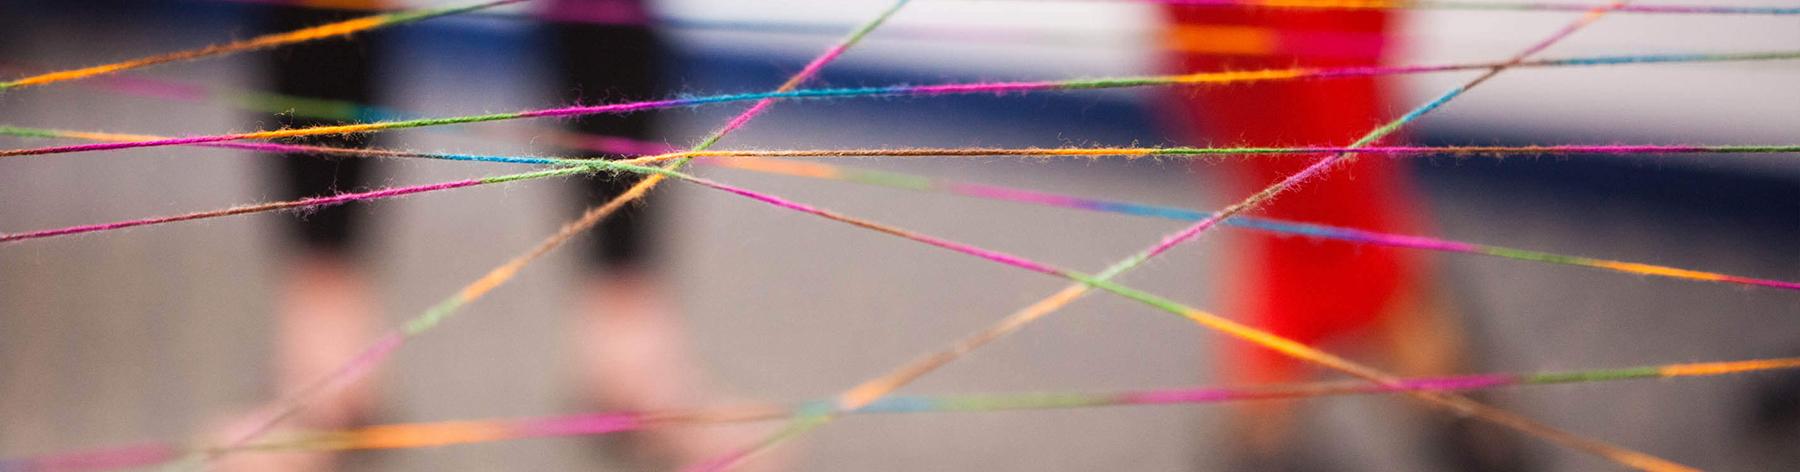 Multi-colored strands of string cross paths